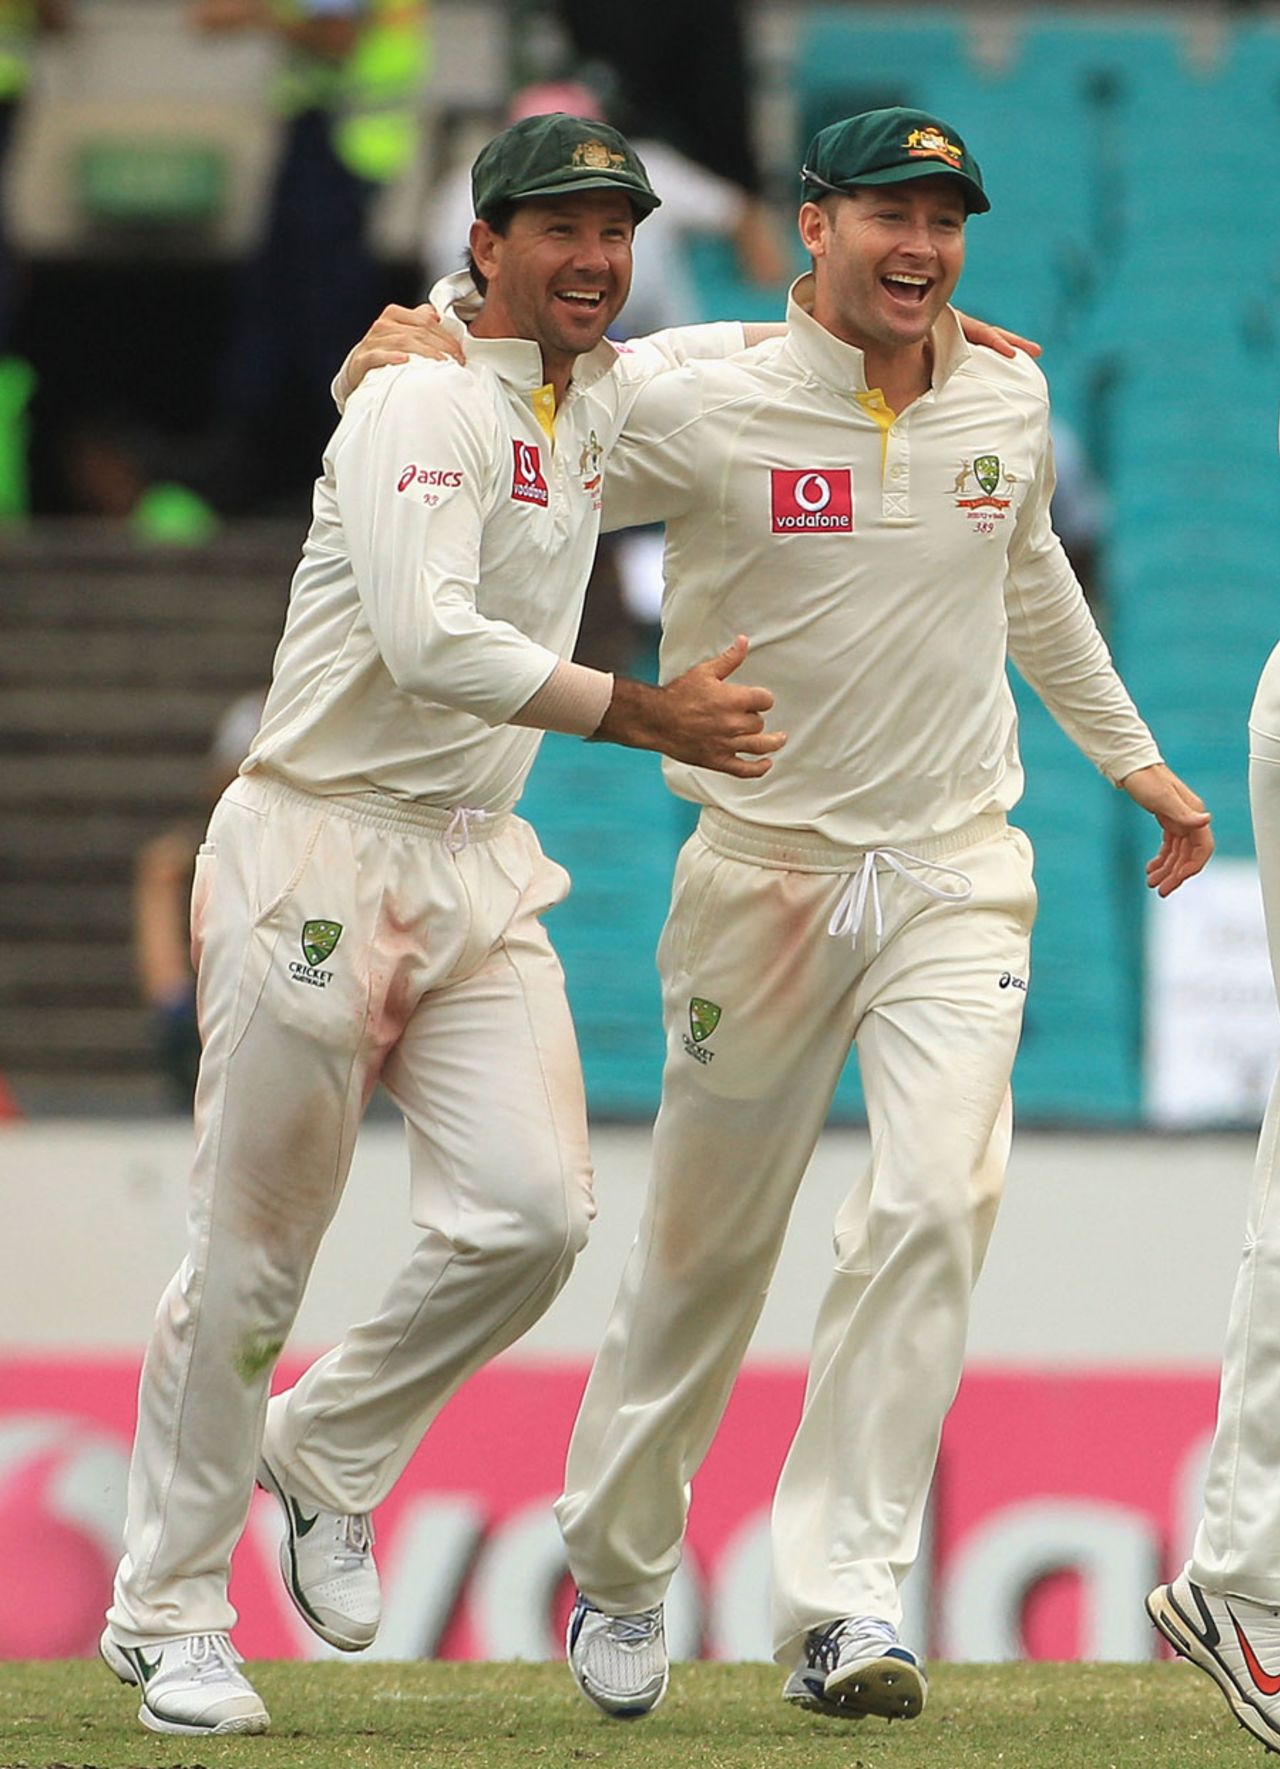 Ricky Ponting and Michael Clarke celebrate winning the New Year's Test, Australia v India, 2nd Test, Sydney, 4th day, January 6, 2012